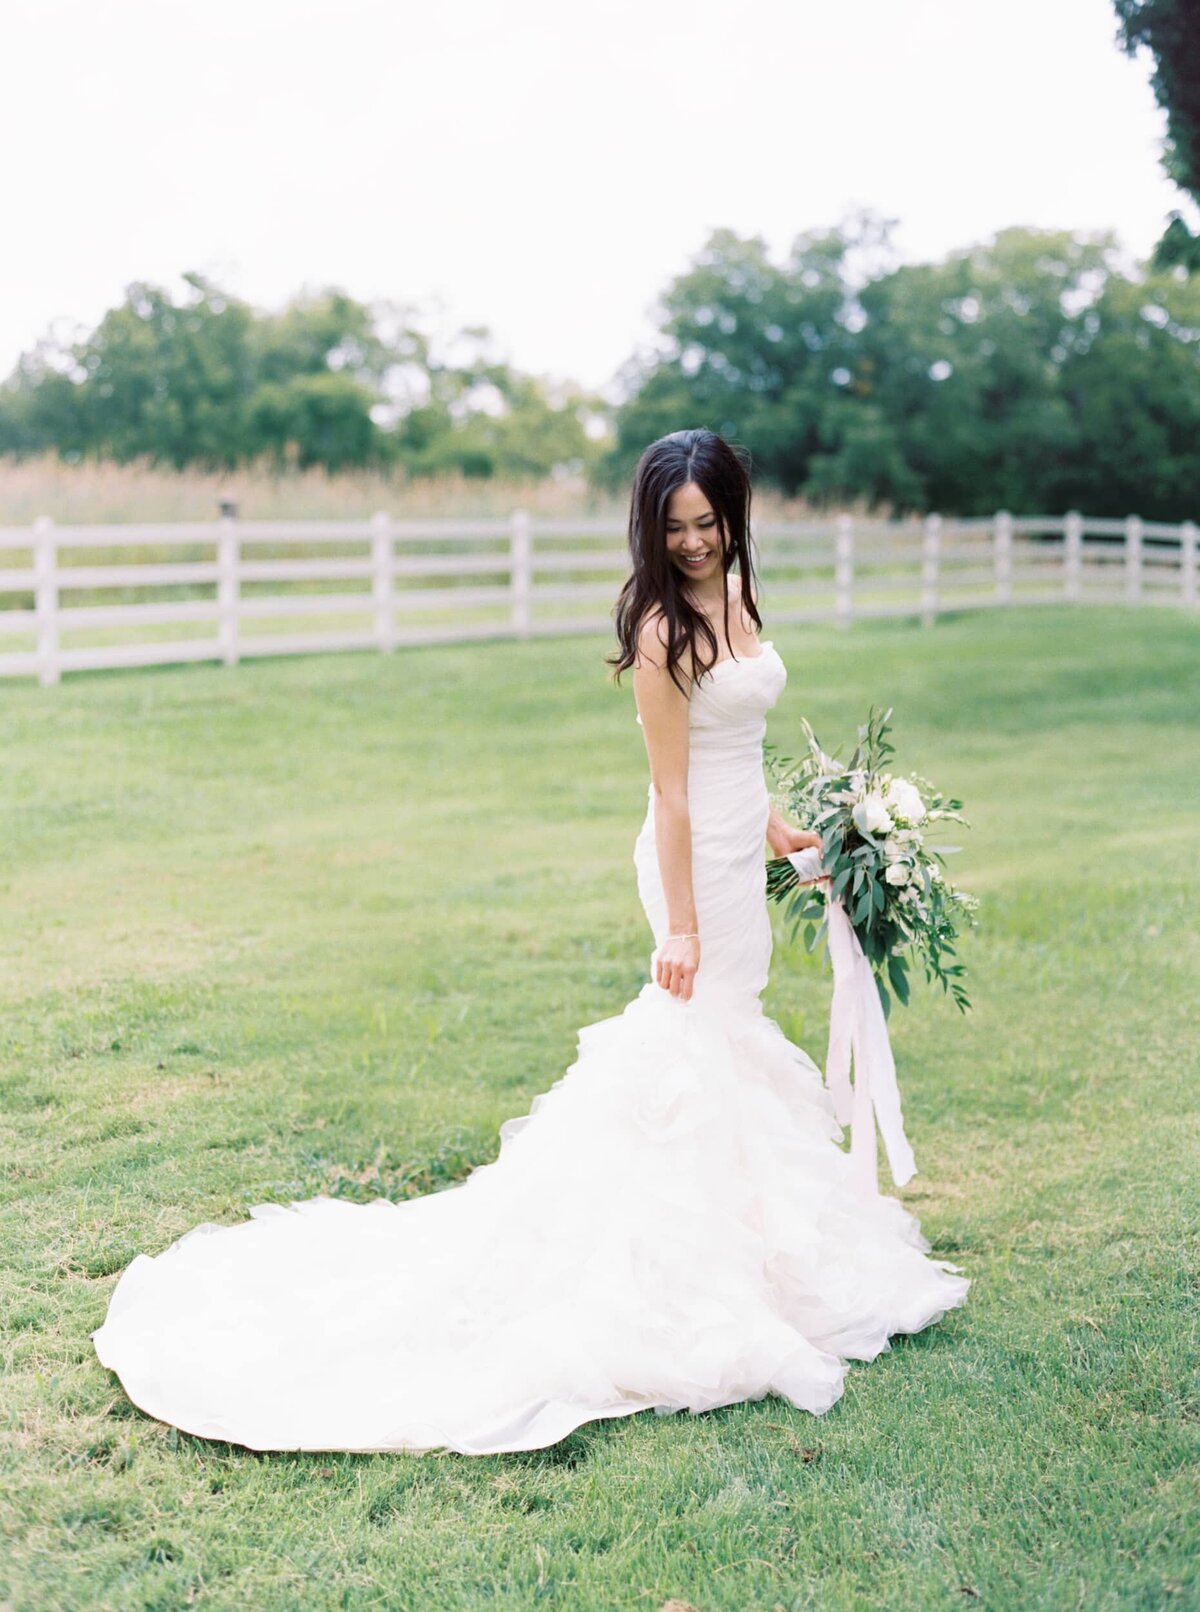 Fionnie_Jacob_Marblegate_Farm_Wedding_Knoxville_Abigail_Malone_Photography-342